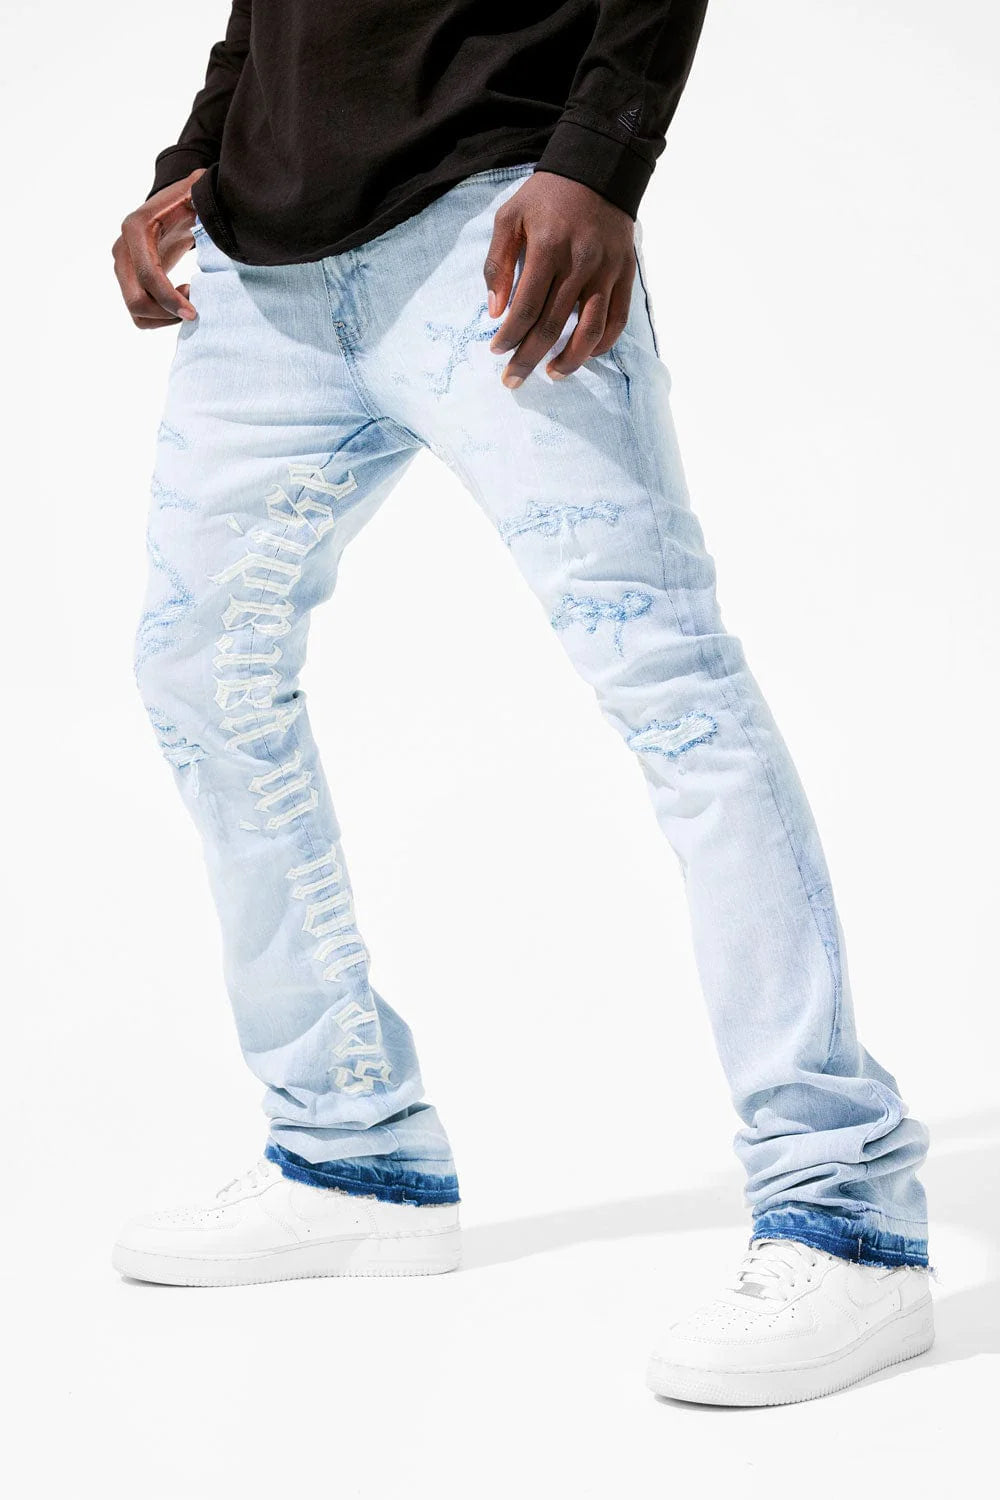 Martin Stacked - See You In Paradise Denim Jeans - Ice Blue